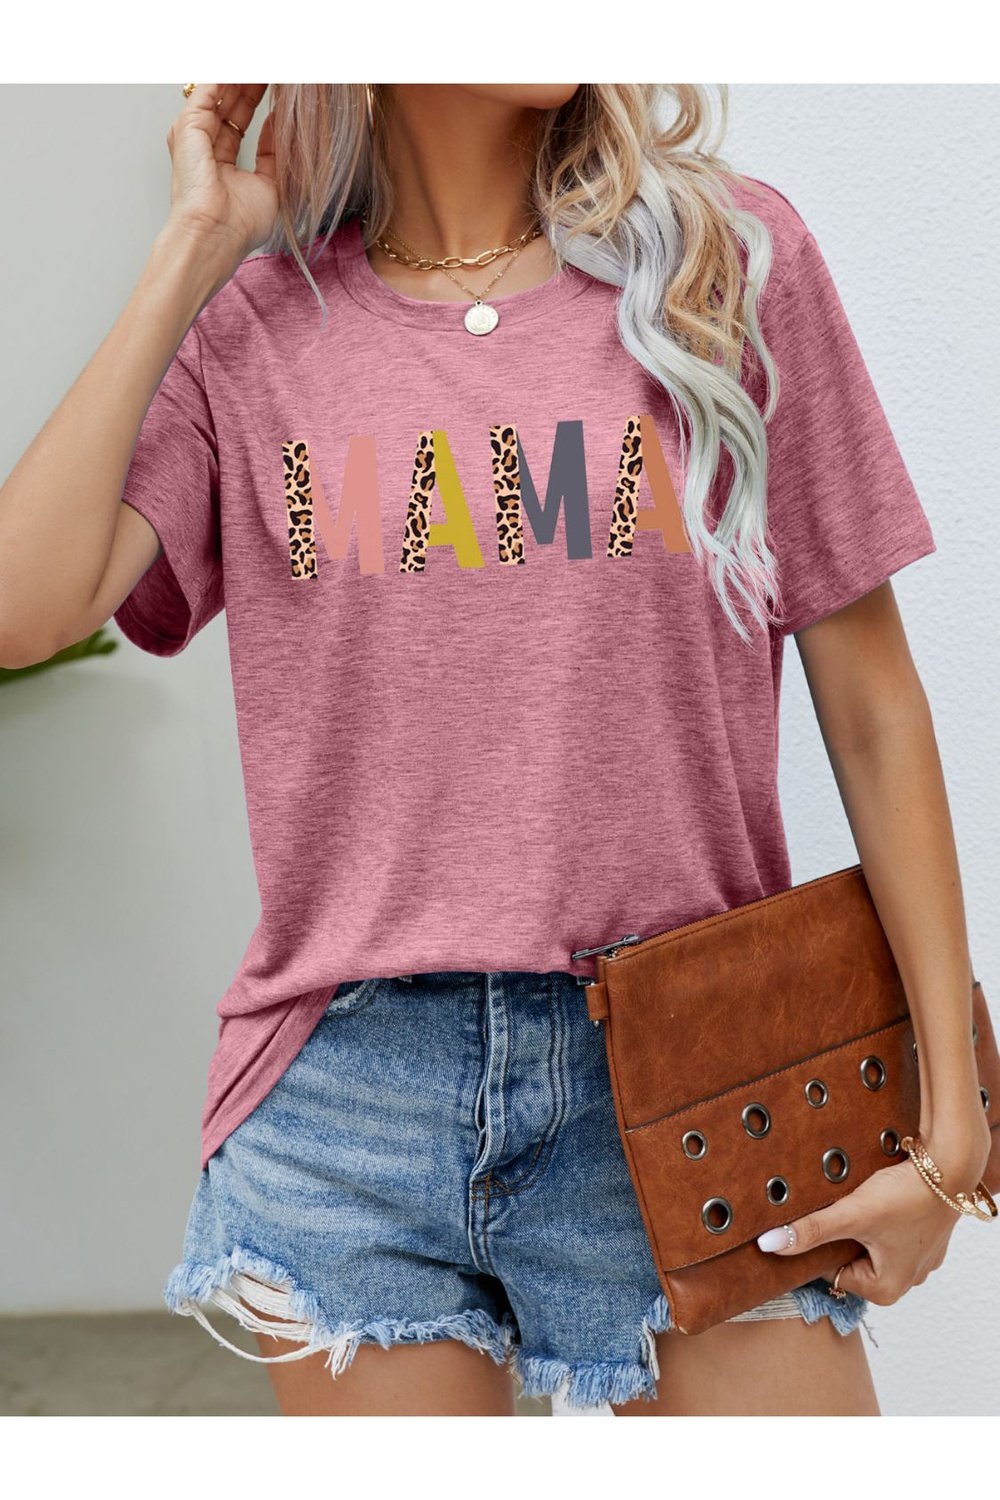 MAMA Leopard Graphic Short Sleeve Tee - T-Shirts - FITGGINS